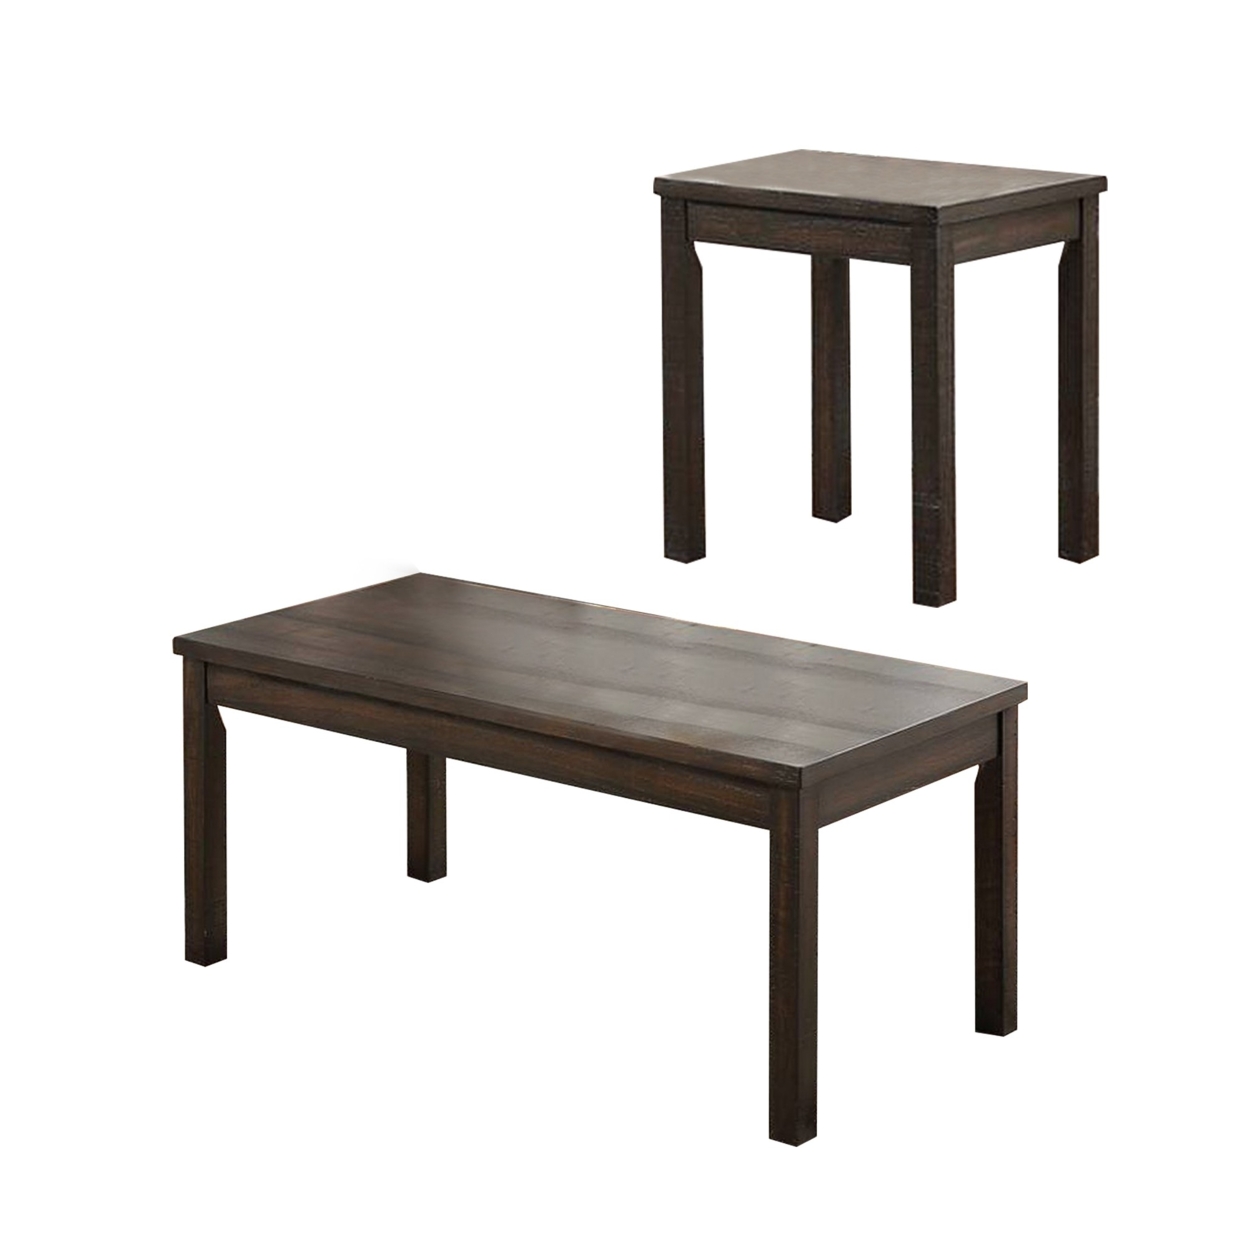 3 Piece Coffee Table And End Table Set, Wood Tabletops, Dark Brown Finish